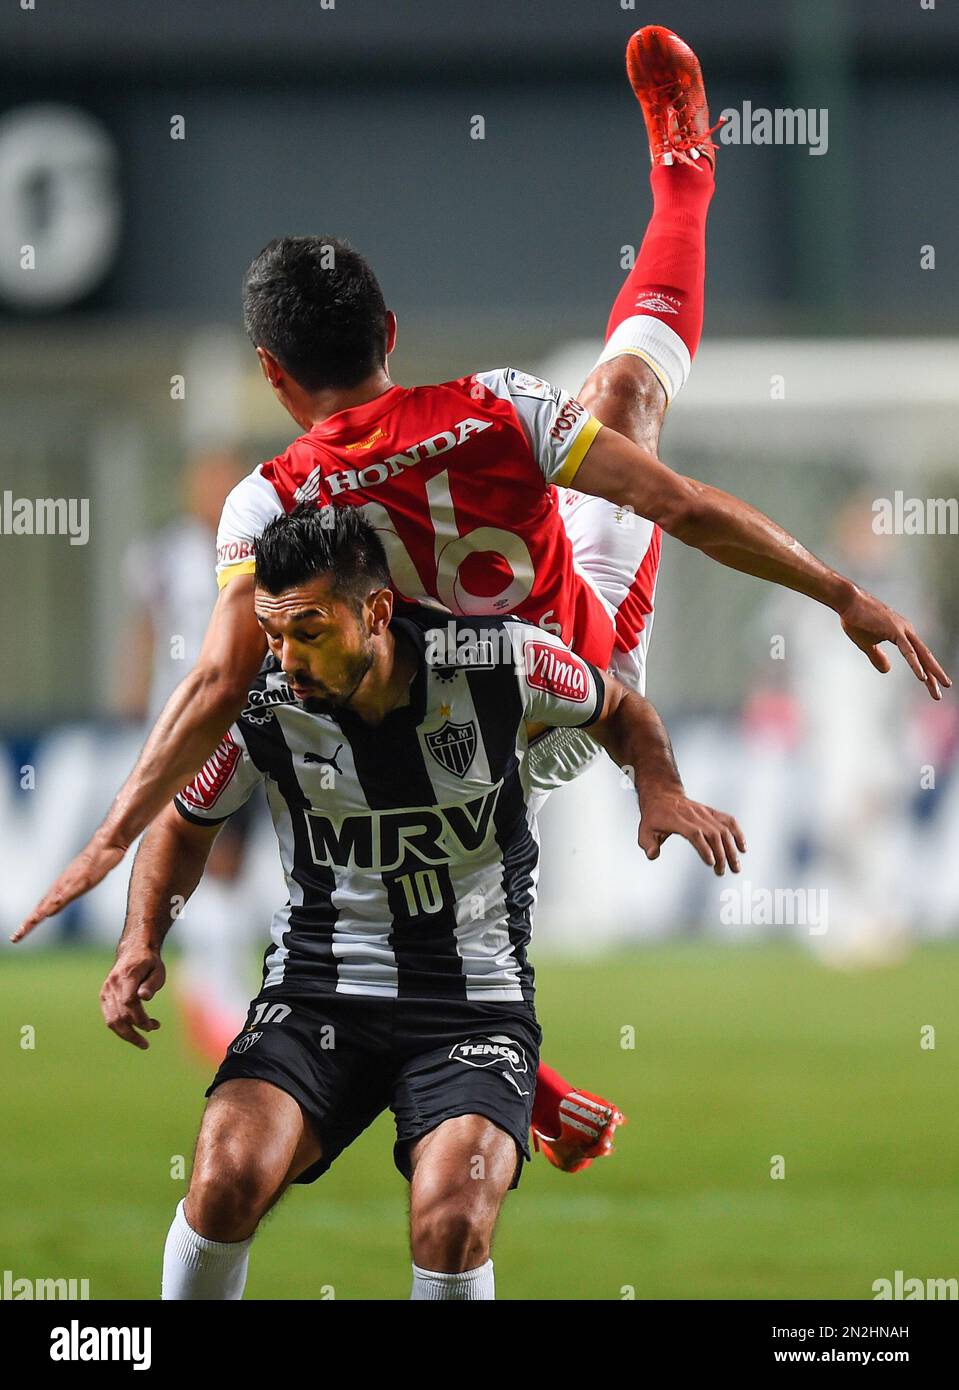 CORRECTING SANTA FE'S COUNTRY TO COLOMBIA - Datolo of Brazil's Atletico Mineiro, bottom, fights for the ball with Daniel Torres of Colombia's Santa Fe, during a Copa Libertadores soccer game in Belo Horizonte, Brazil, Thursday, April 9, 2015. (AP Photo/Juliana Flister) Stock Photo